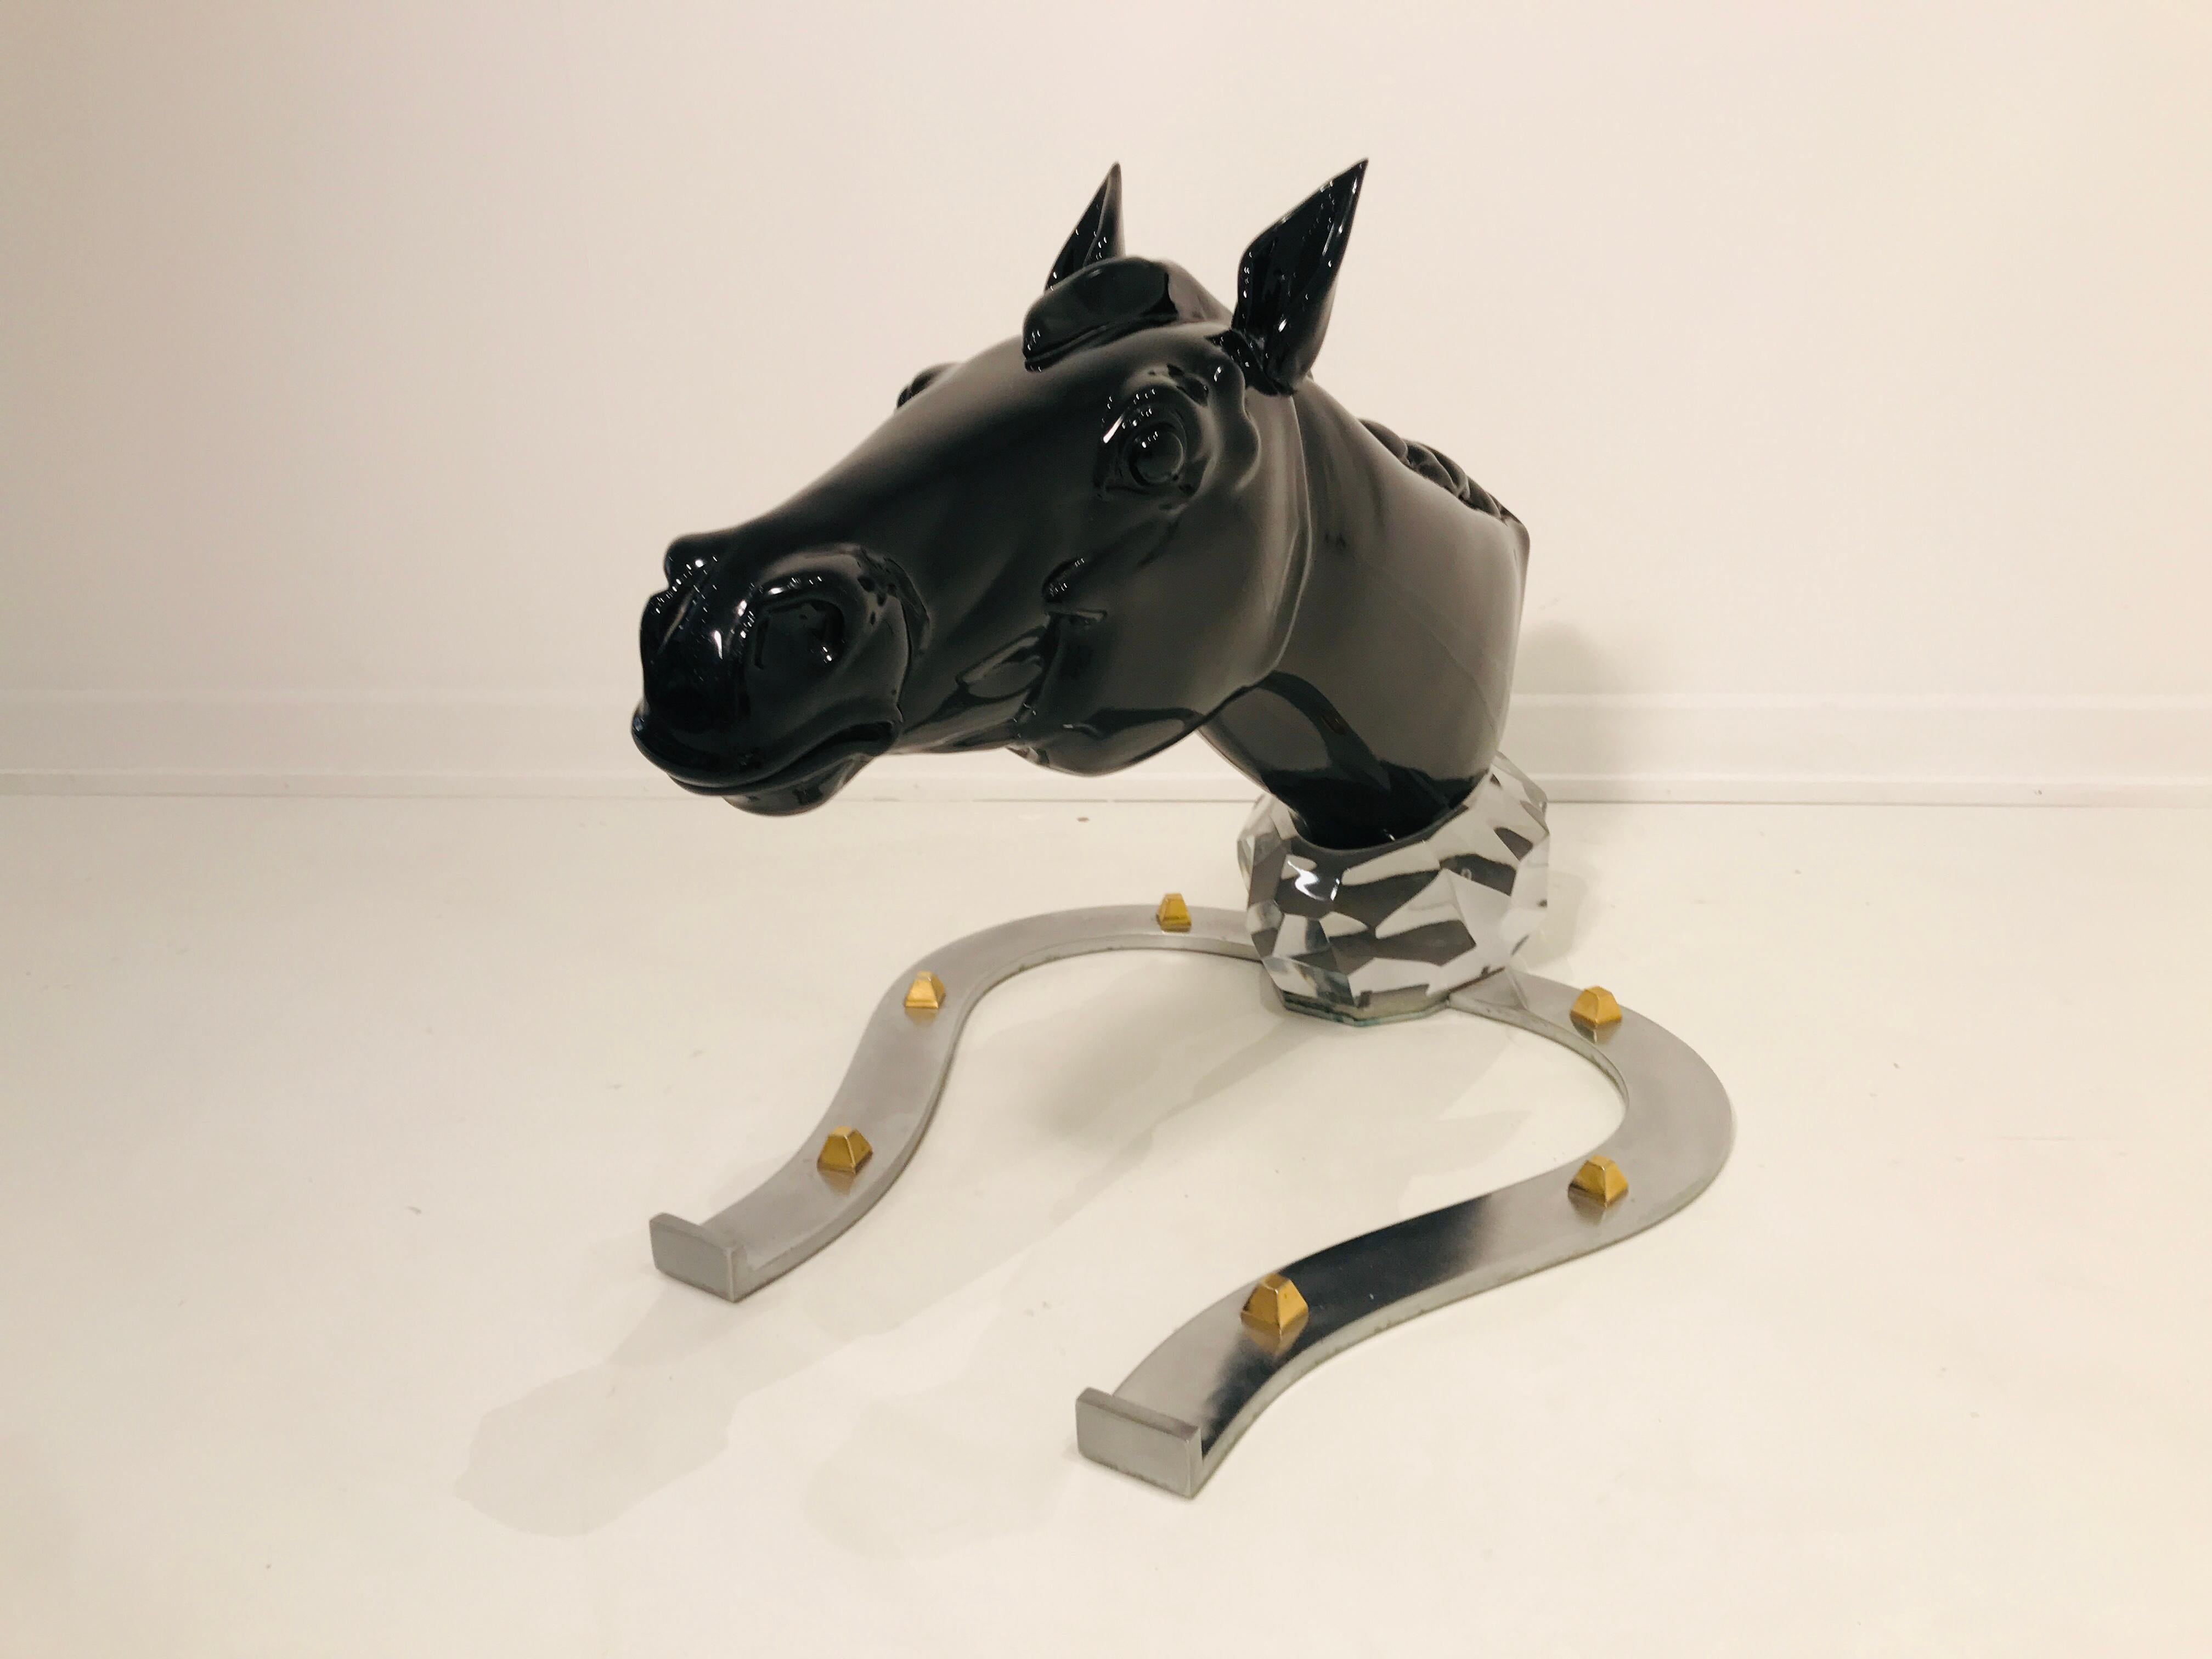 Sculptural horse in glass by Pino Signoretto, signed by the artist, Black glass from Murano.
Pino Signoretto 1944-2017 Murano art glass sculpture.
One of a kind....
circa 1980.